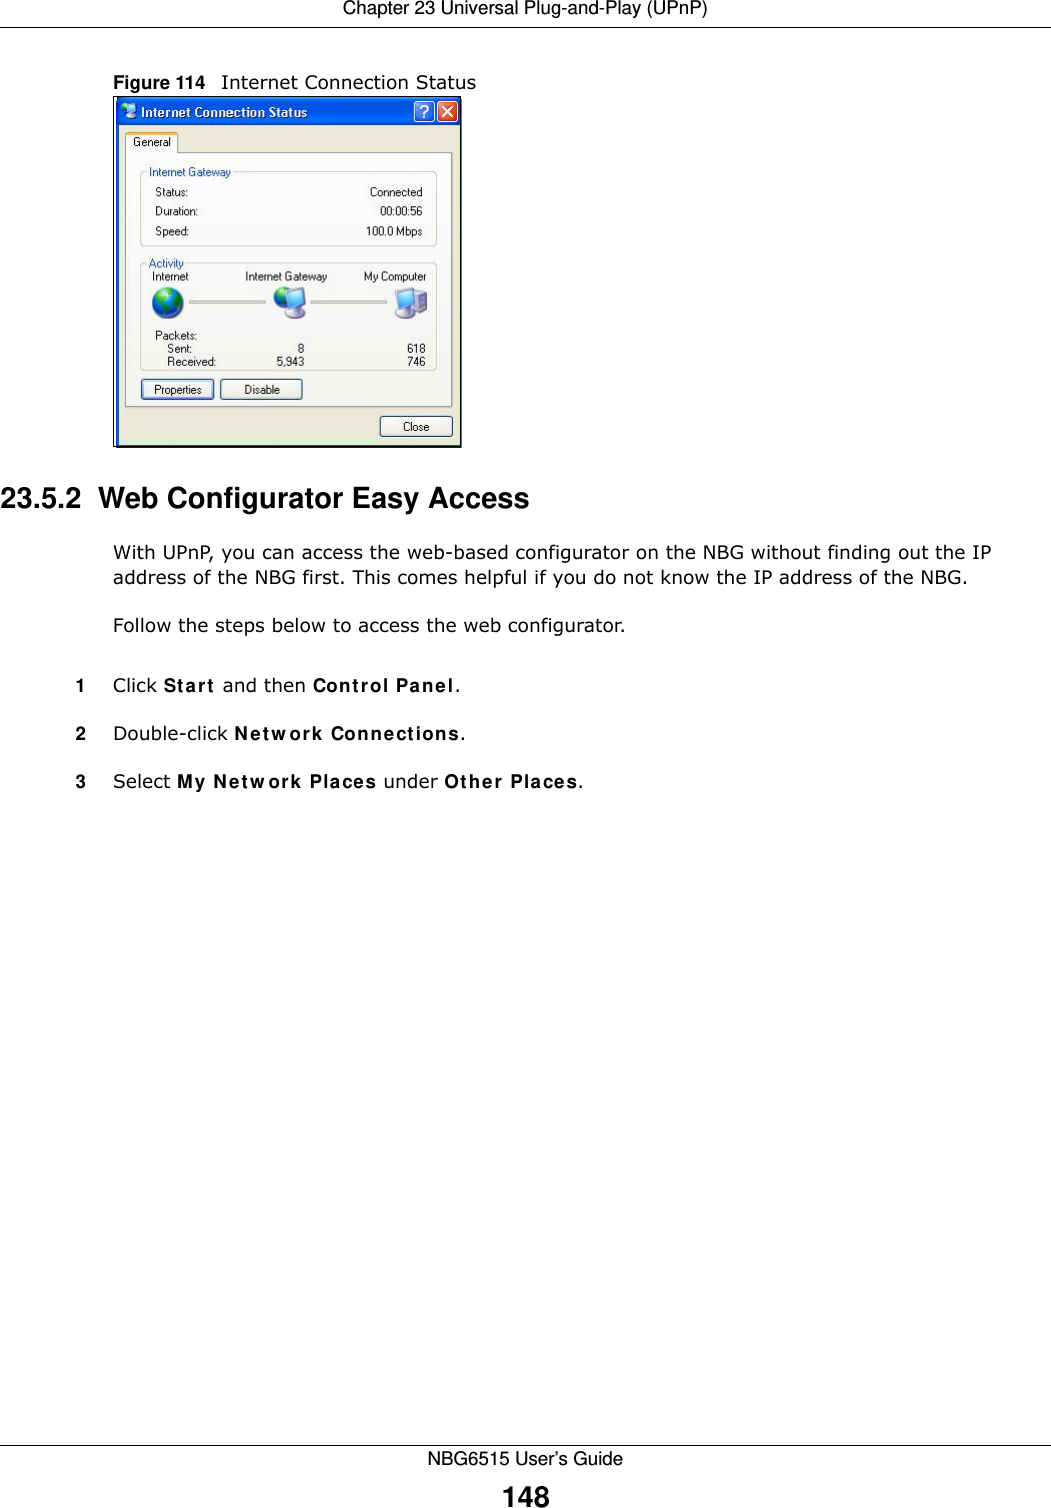 Chapter 23 Universal Plug-and-Play (UPnP)NBG6515 User’s Guide148Figure 114   Internet Connection Status23.5.2  Web Configurator Easy AccessWith UPnP, you can access the web-based configurator on the NBG without finding out the IP address of the NBG first. This comes helpful if you do not know the IP address of the NBG.Follow the steps below to access the web configurator.1Click Start and then Control Panel. 2Double-click Network Connections. 3Select My Network Places under Other Places. 